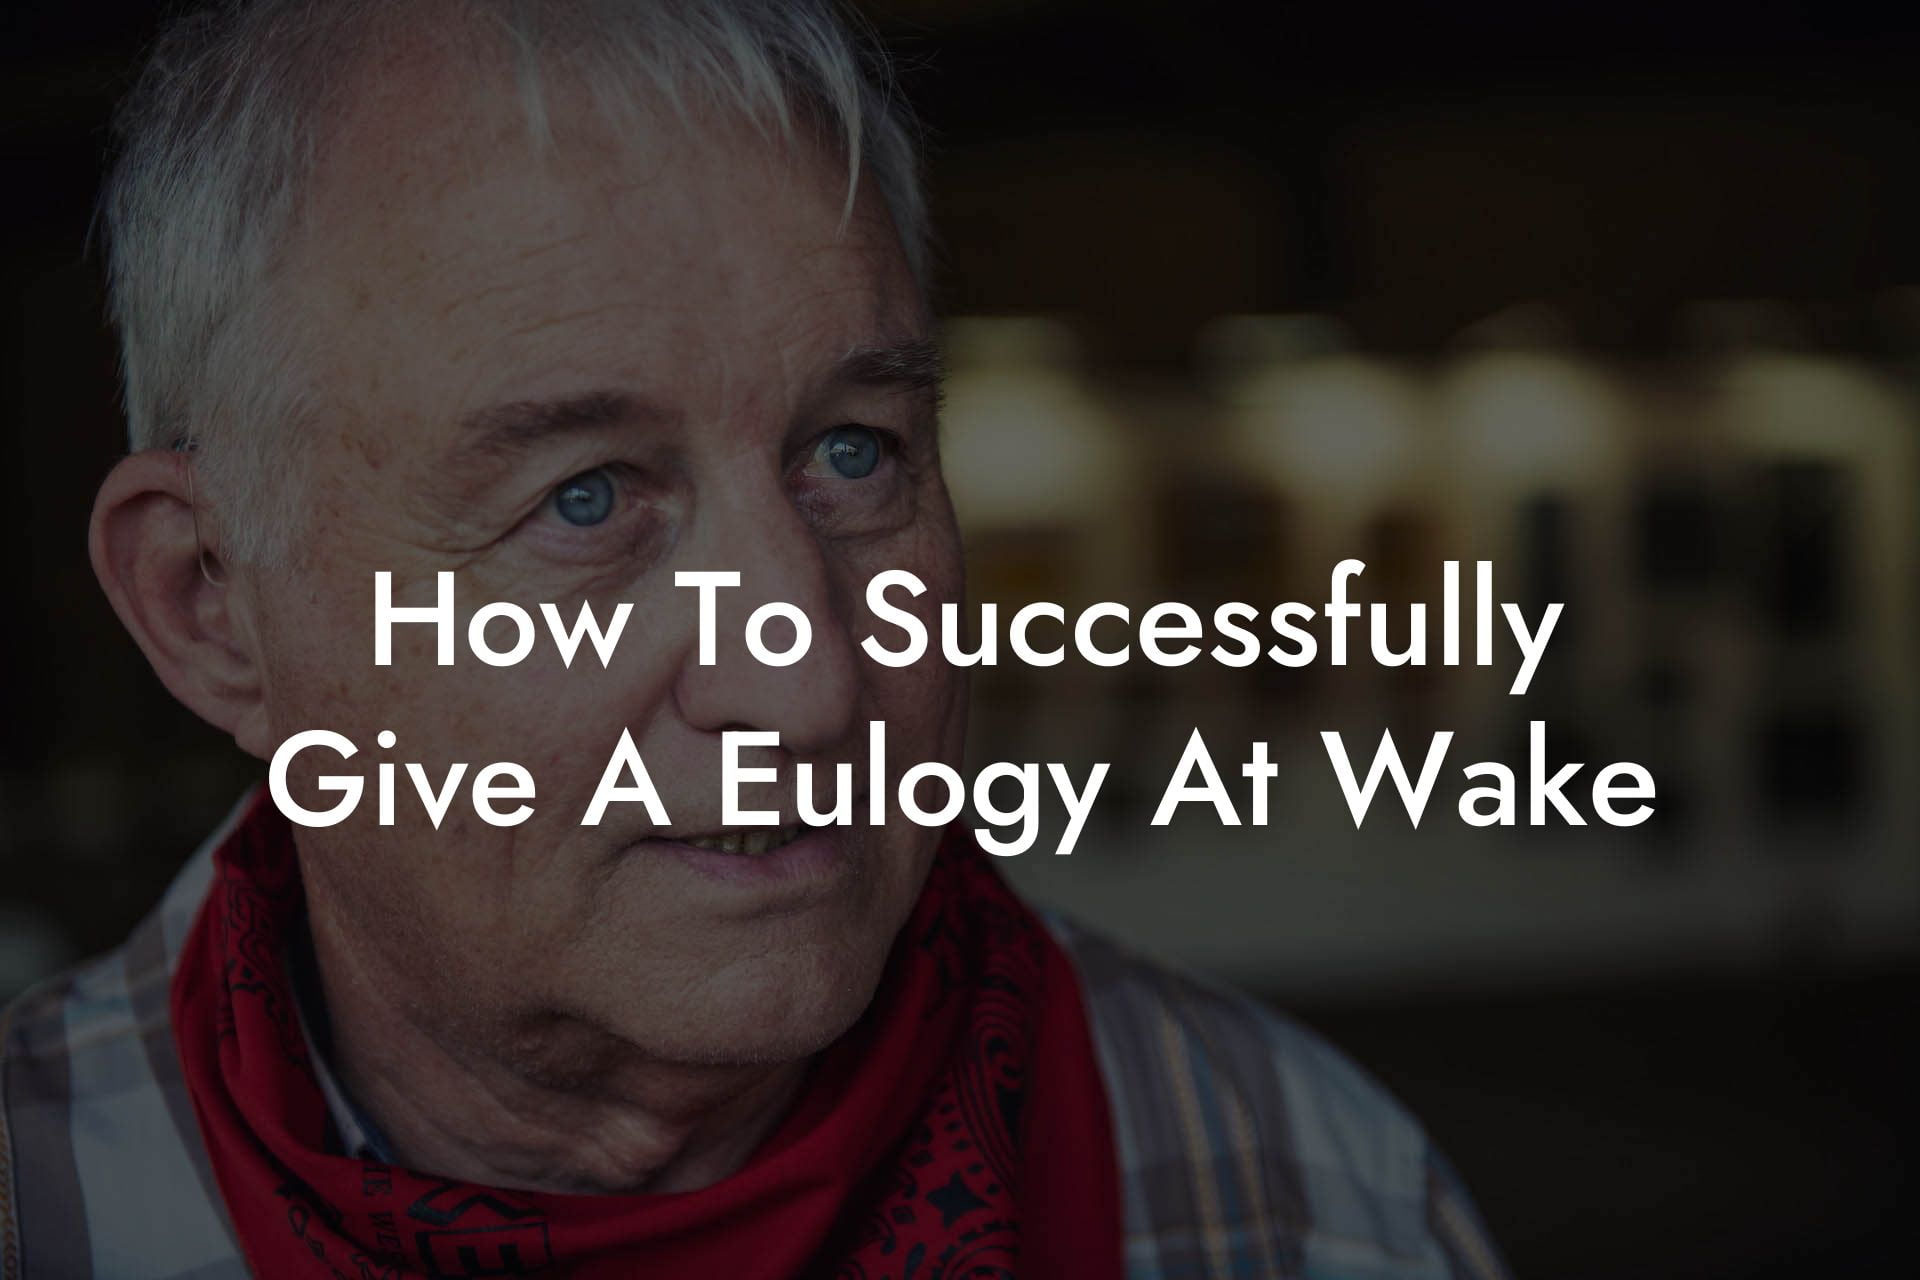 How To Successfully Give A Eulogy At Wake